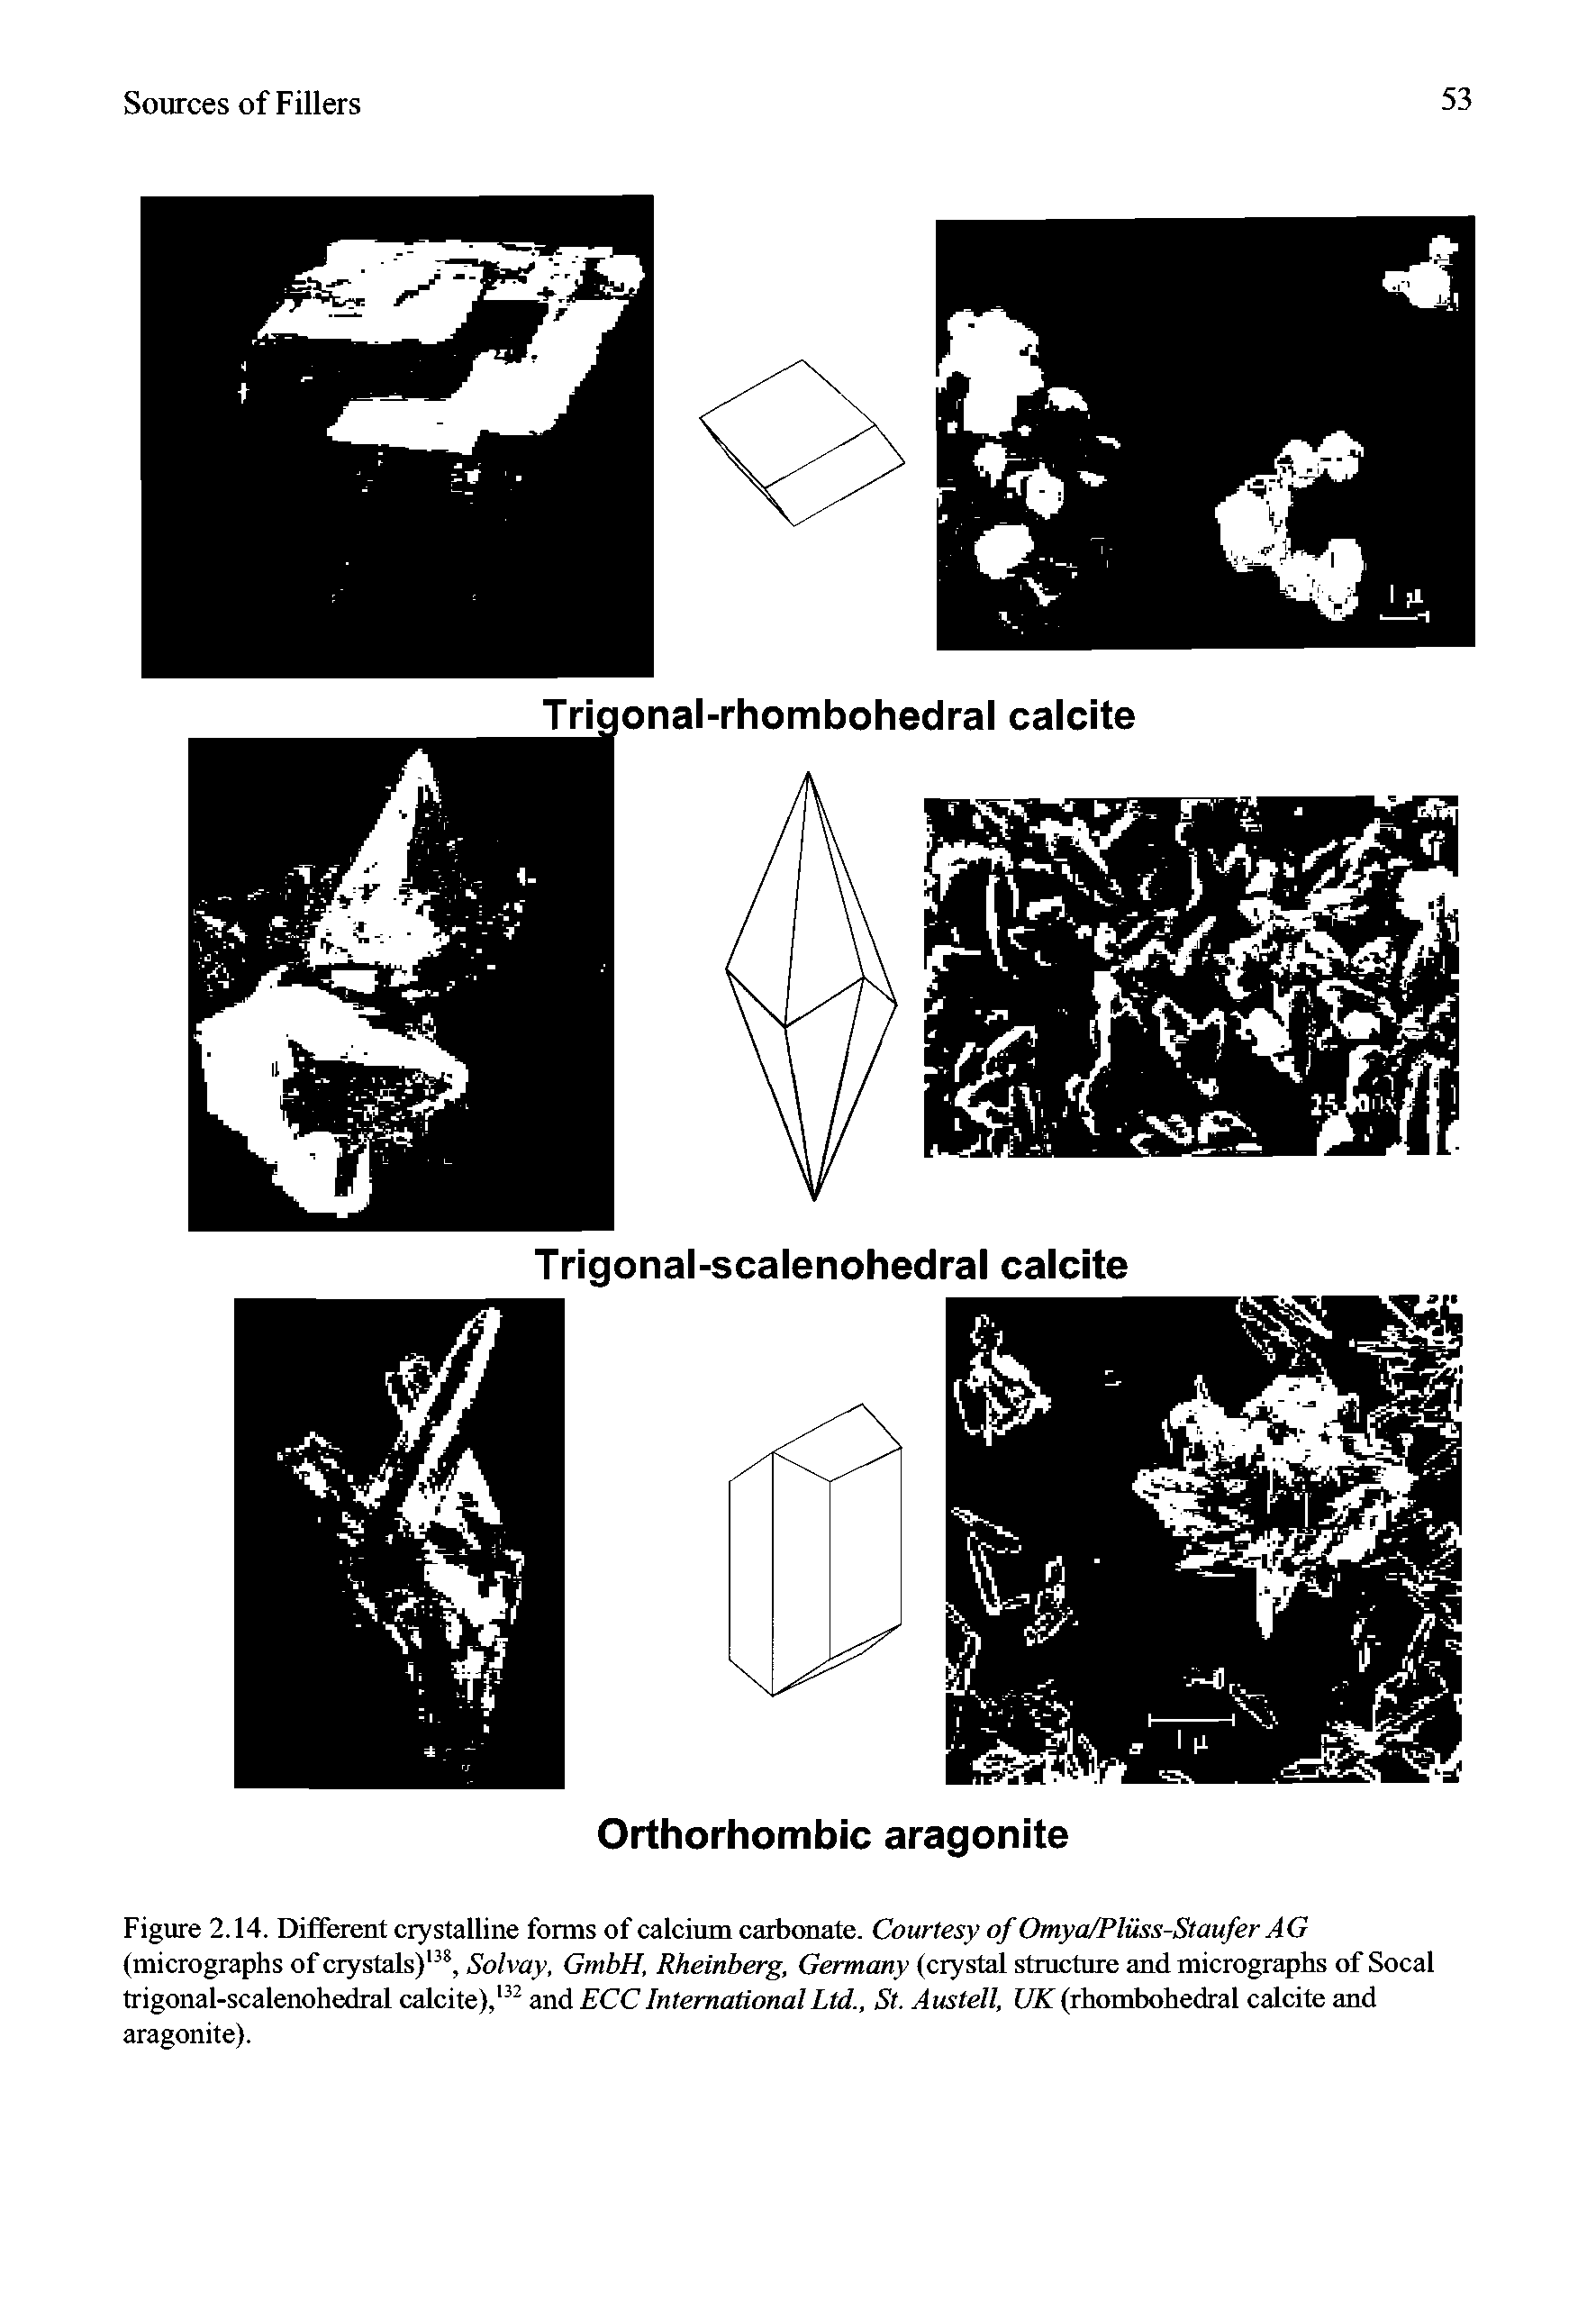 Figure 2.14. Different crystalline forms of calcium carbonate. Courtesy of Omya/Pliiss-Staufer AG (micrographs of crystals), Solvay, GmbH, Rheinberg, Germany (crystal structure and micrographs of Socal trigonal-scalenohedral calcite),and ECC International Ltd., St, Amtell, UK (rhombohedral calcite and aragonite).